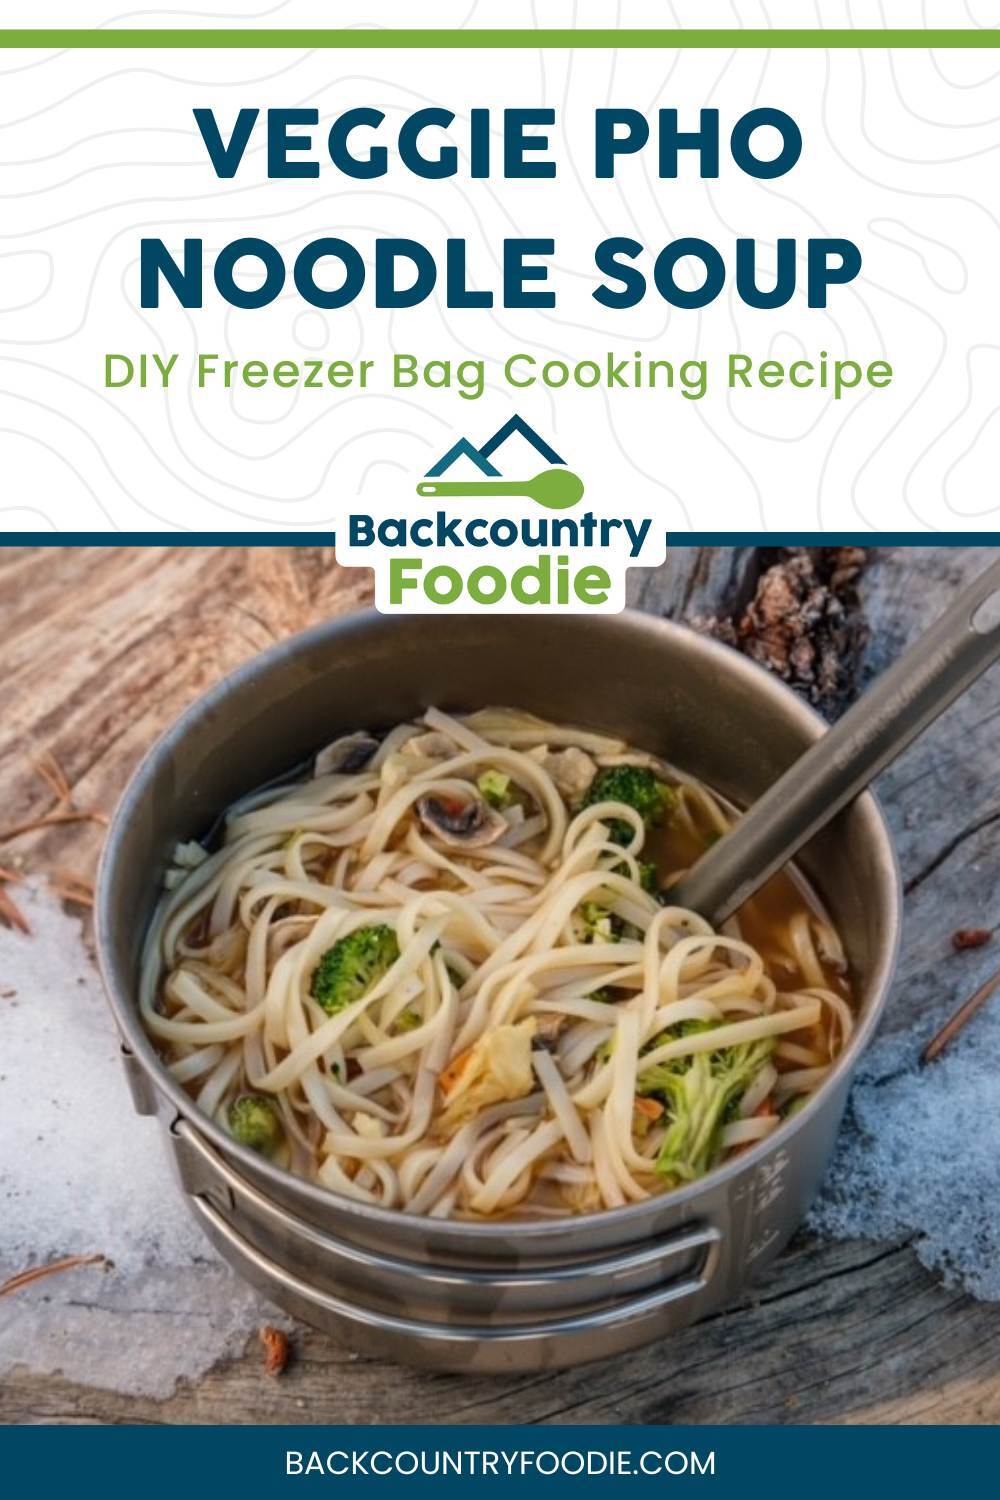 Veggie pho noodle soup in a backpacking pot